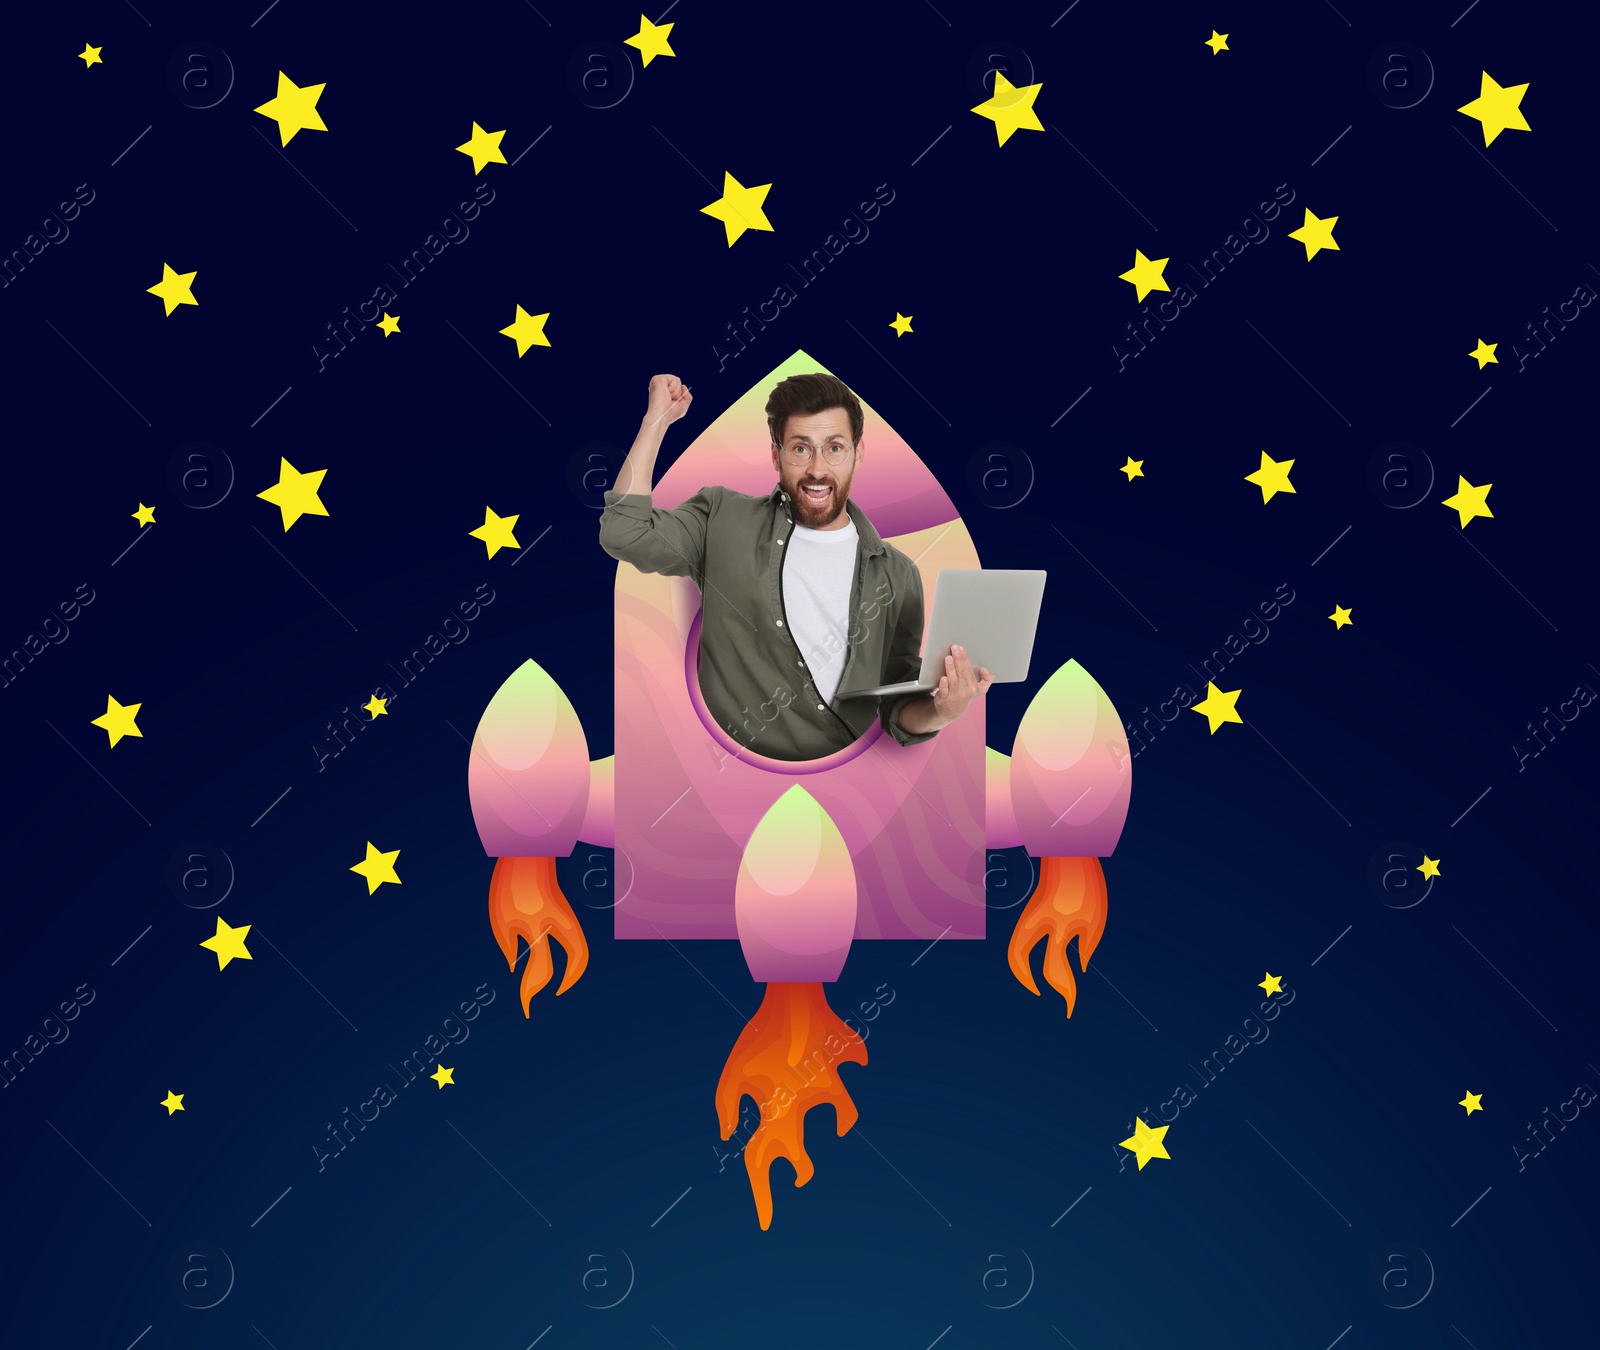 Image of Way to success. Happy man with laptop in rocket rising up into night sky. Illustration of spaceship and stars